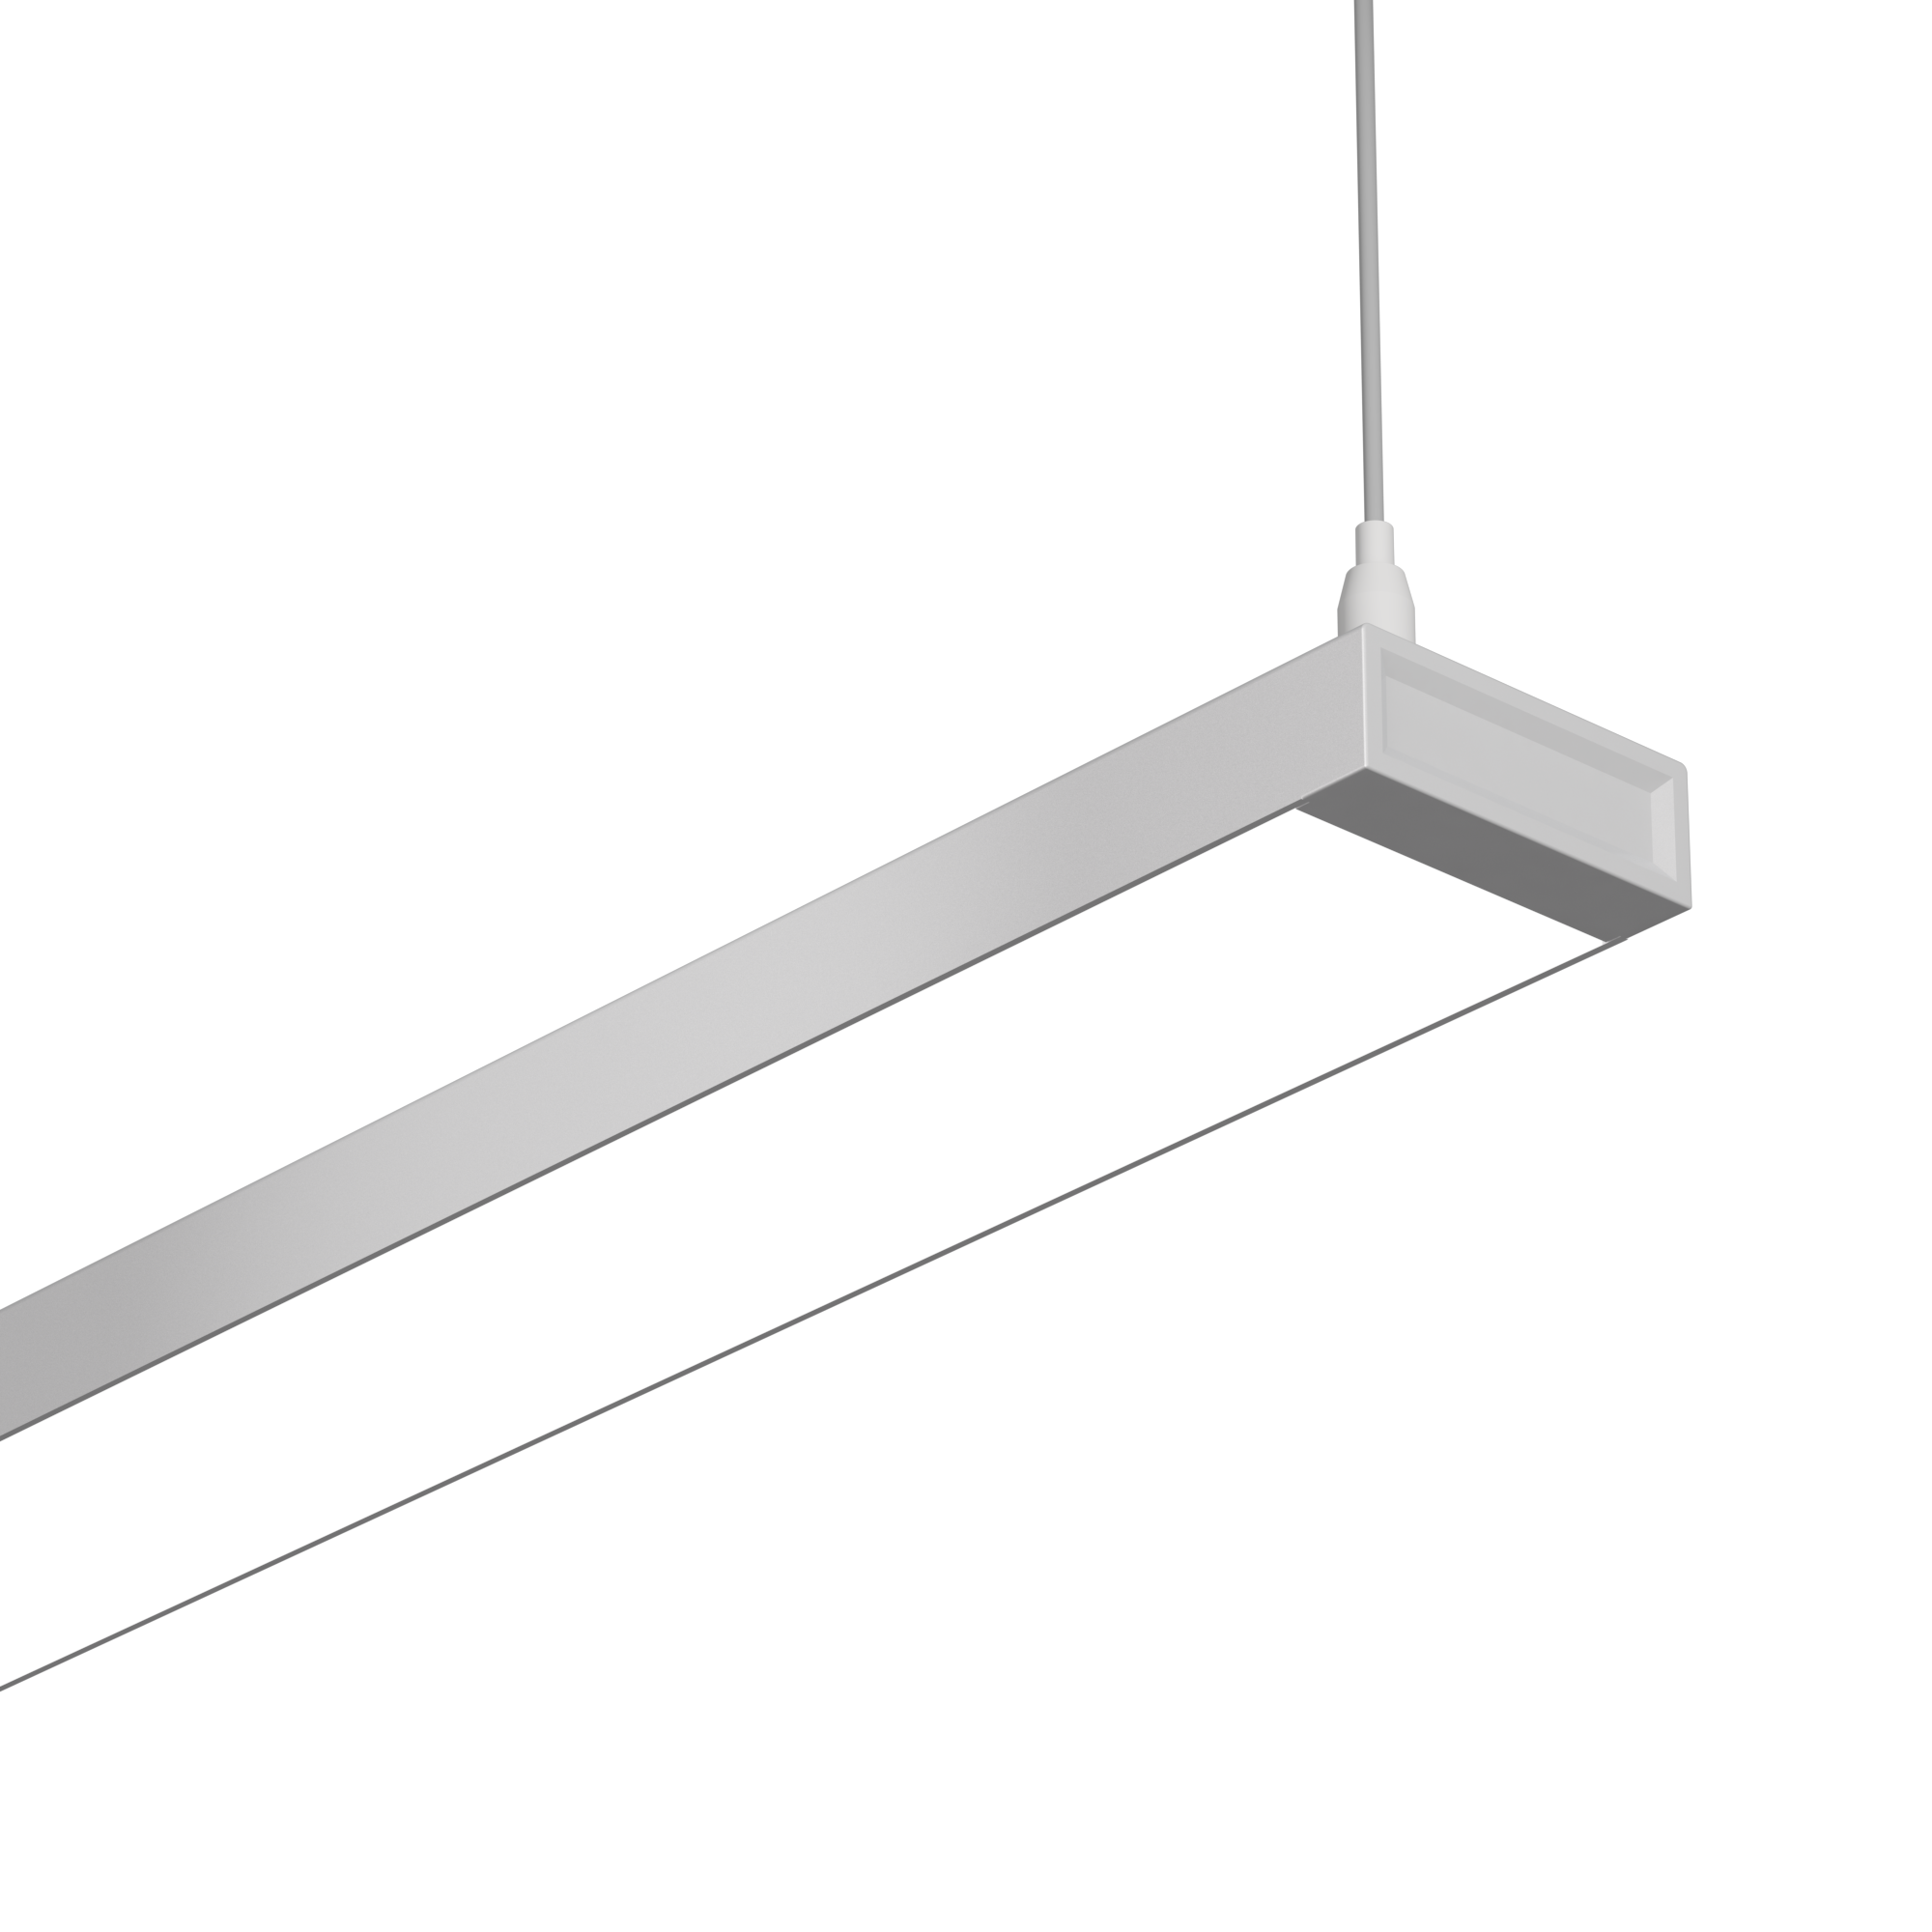 Edge-Lit Low-Profile LED Linear Pendant
EDGESolo 2.75 Pendant is an innovative low-profile LED luminaire designed to provide the perfect direct and indirect light. EDGE products all provide best-in-class efficiency and beam control options. Solo 275 is specification-grade with high lumen per foot, high CRI, and circadian options. Solo 275 incorporates an engineered LED light engine with fully customizable choices for lumen output, CCT, and CRI.

 

Rectangular profile: 2.75” (70mm) x 0.98” (25mm)